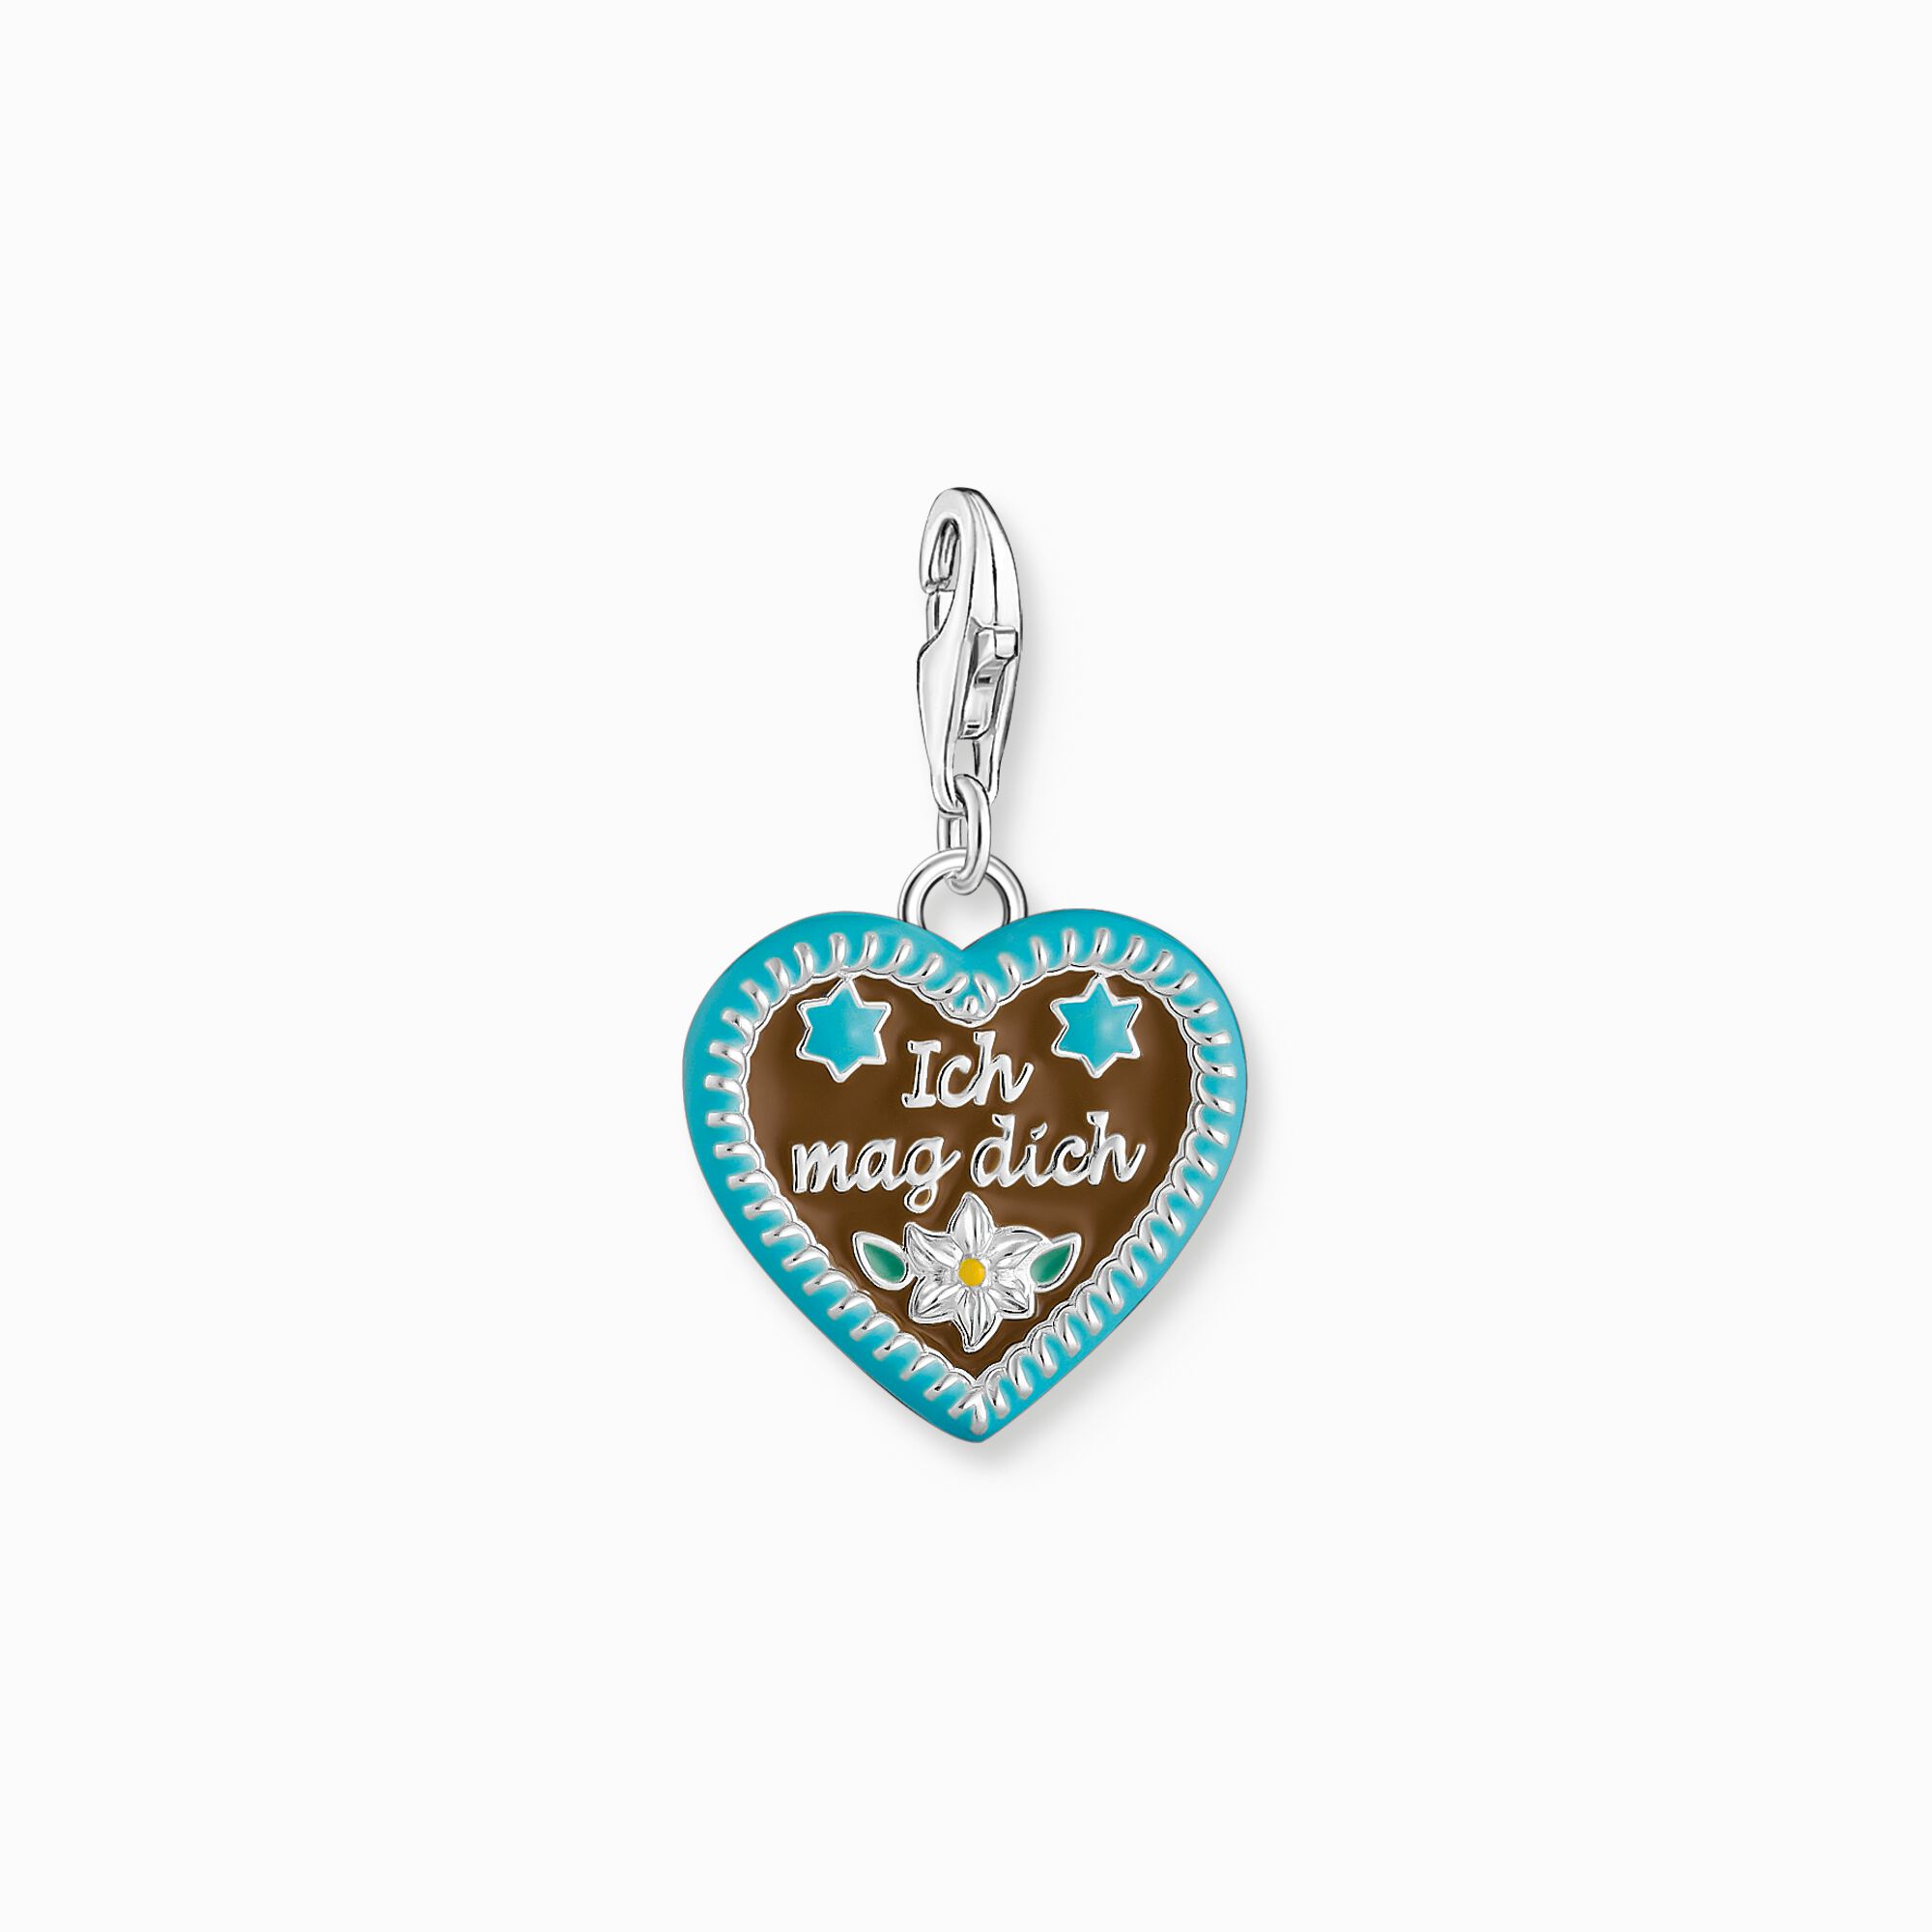 Charm pendant colorful gingerbread heart silver from the Charm Club collection in the THOMAS SABO online store